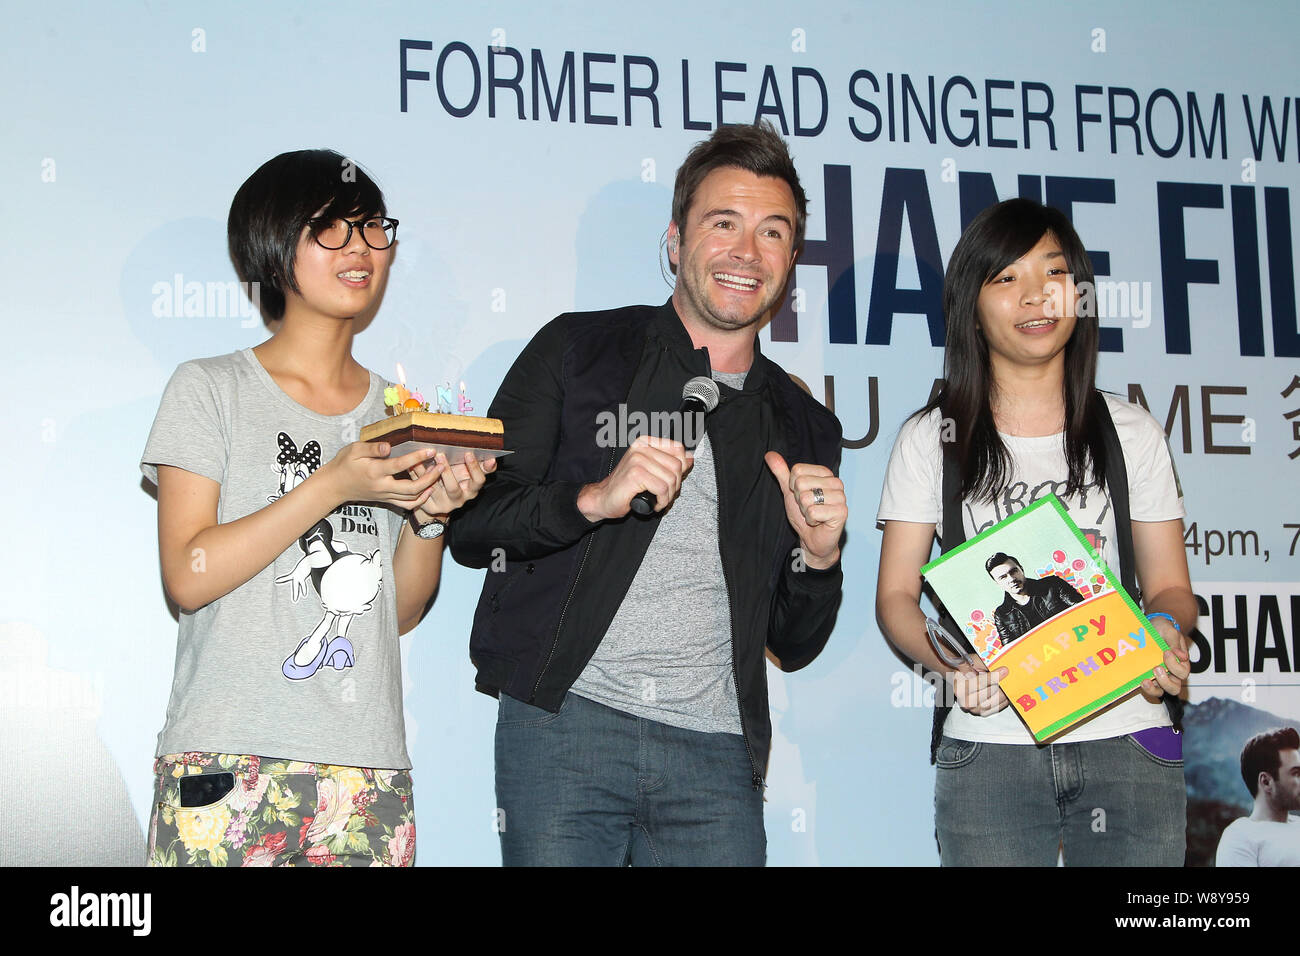 Shane Filan, former lead singer of Irish boy group Westlife, center, poses with fans at a signing event for his new album, You And Me, in Taipei, Taiw Stock Photo